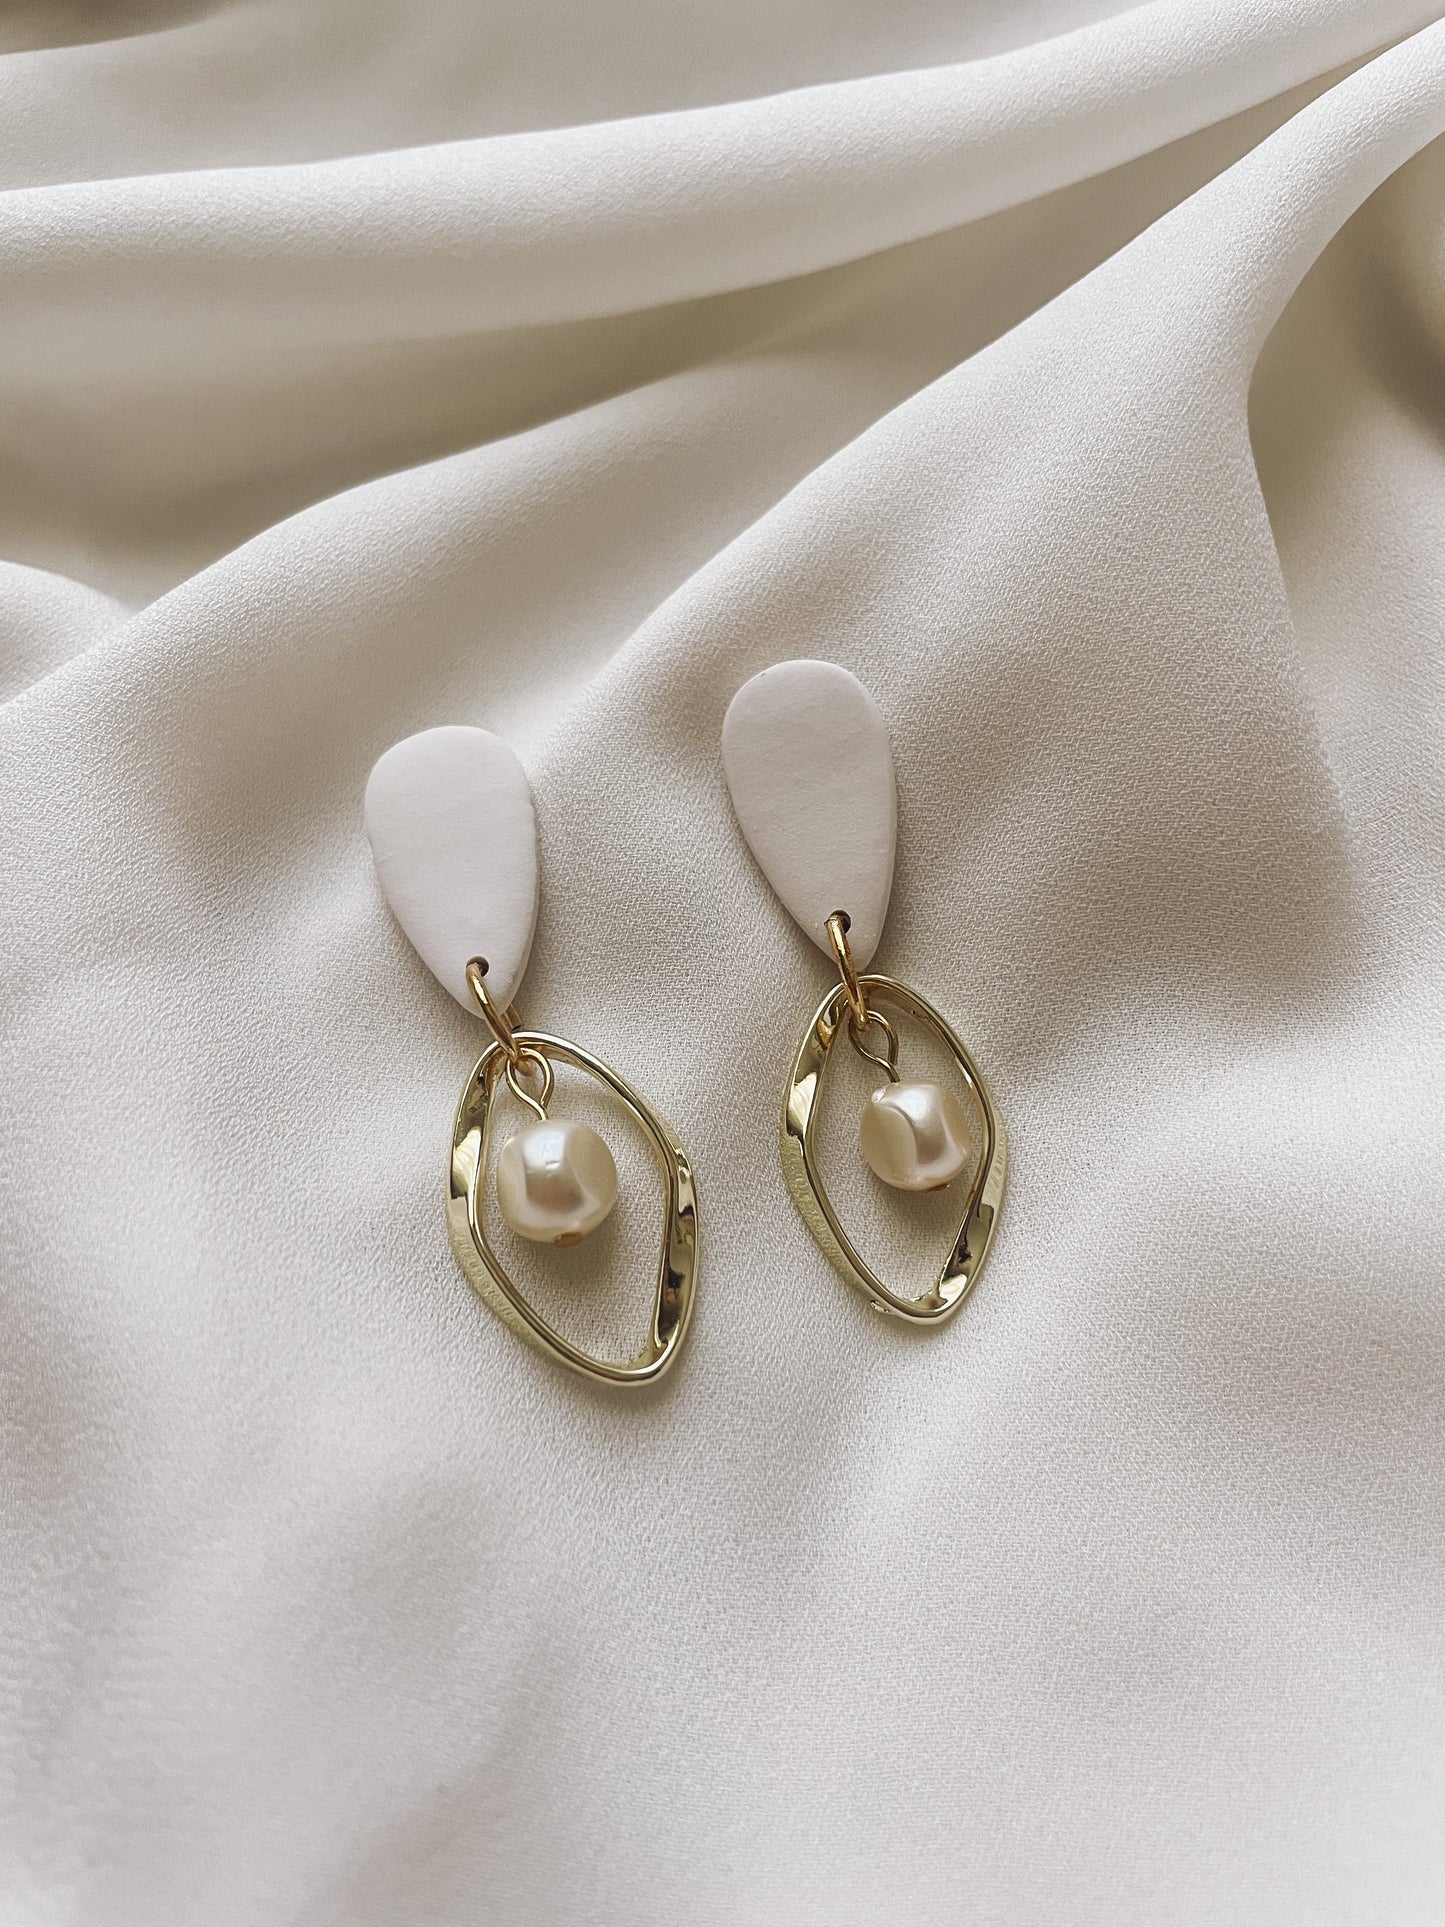 Neutral Elegant Drop Earrings with Gold and Pearl Accentsh